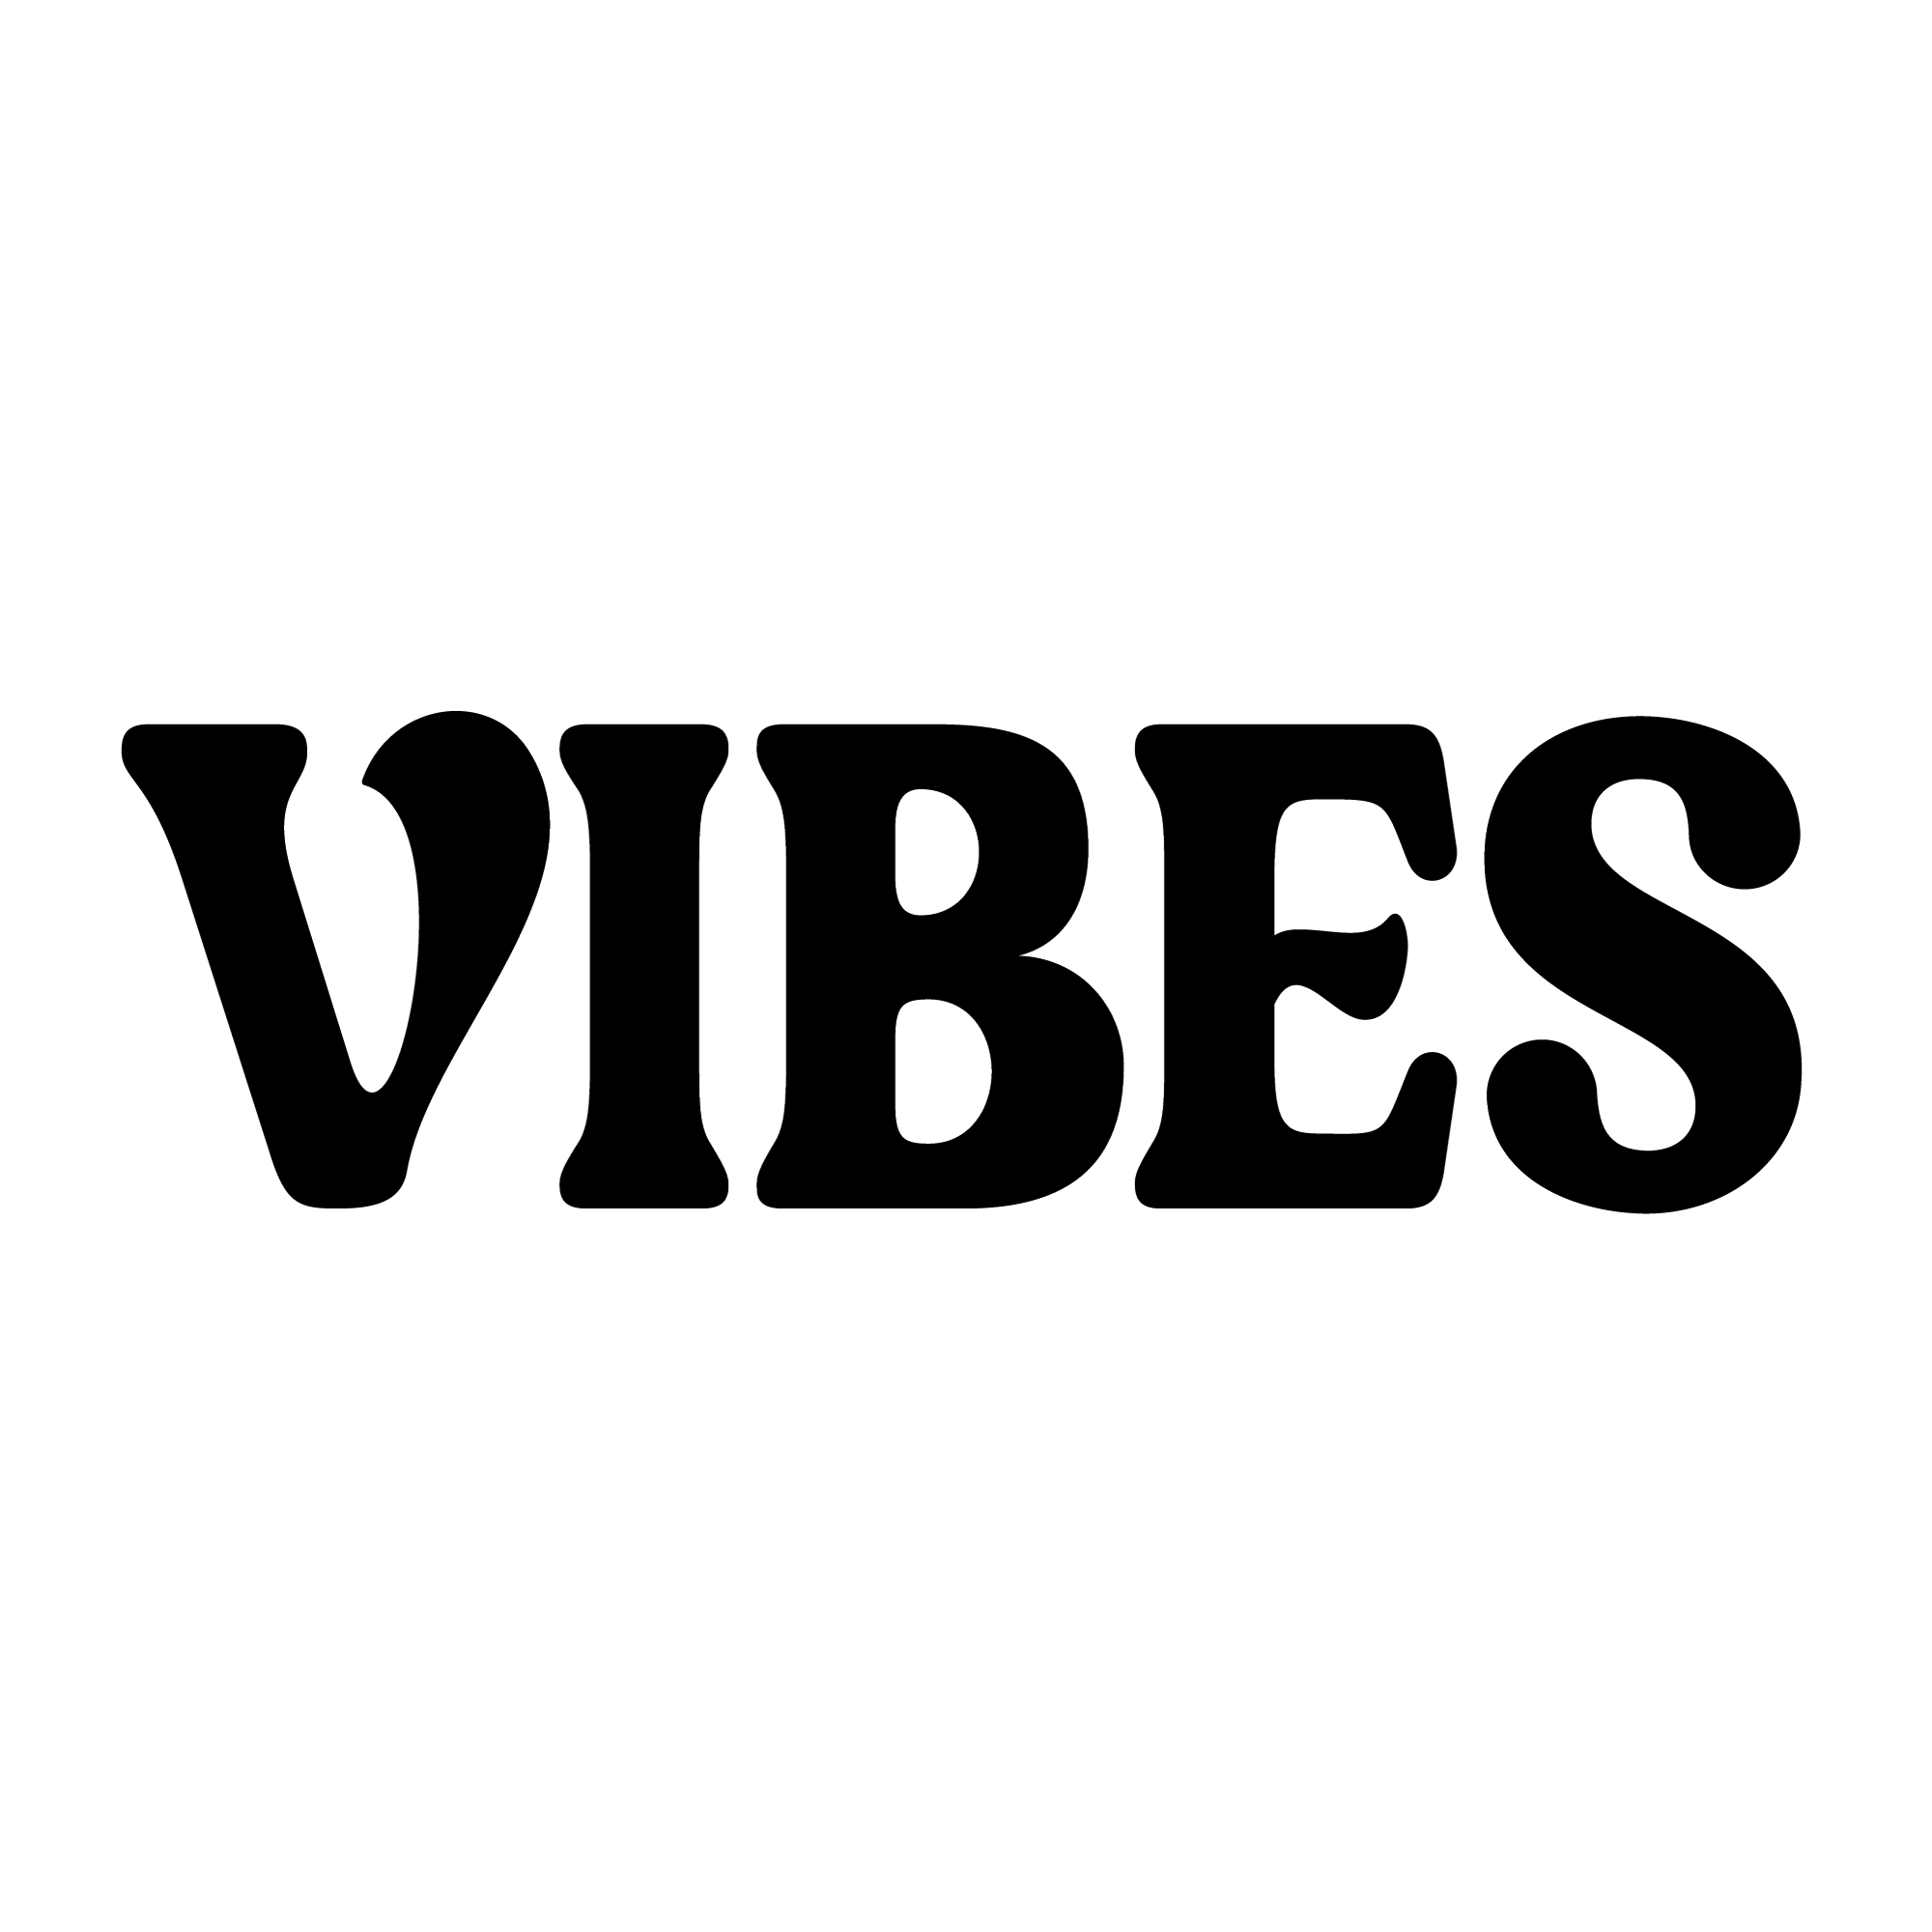 Punch Vibes Sticker by Vibe FM for iOS & Android